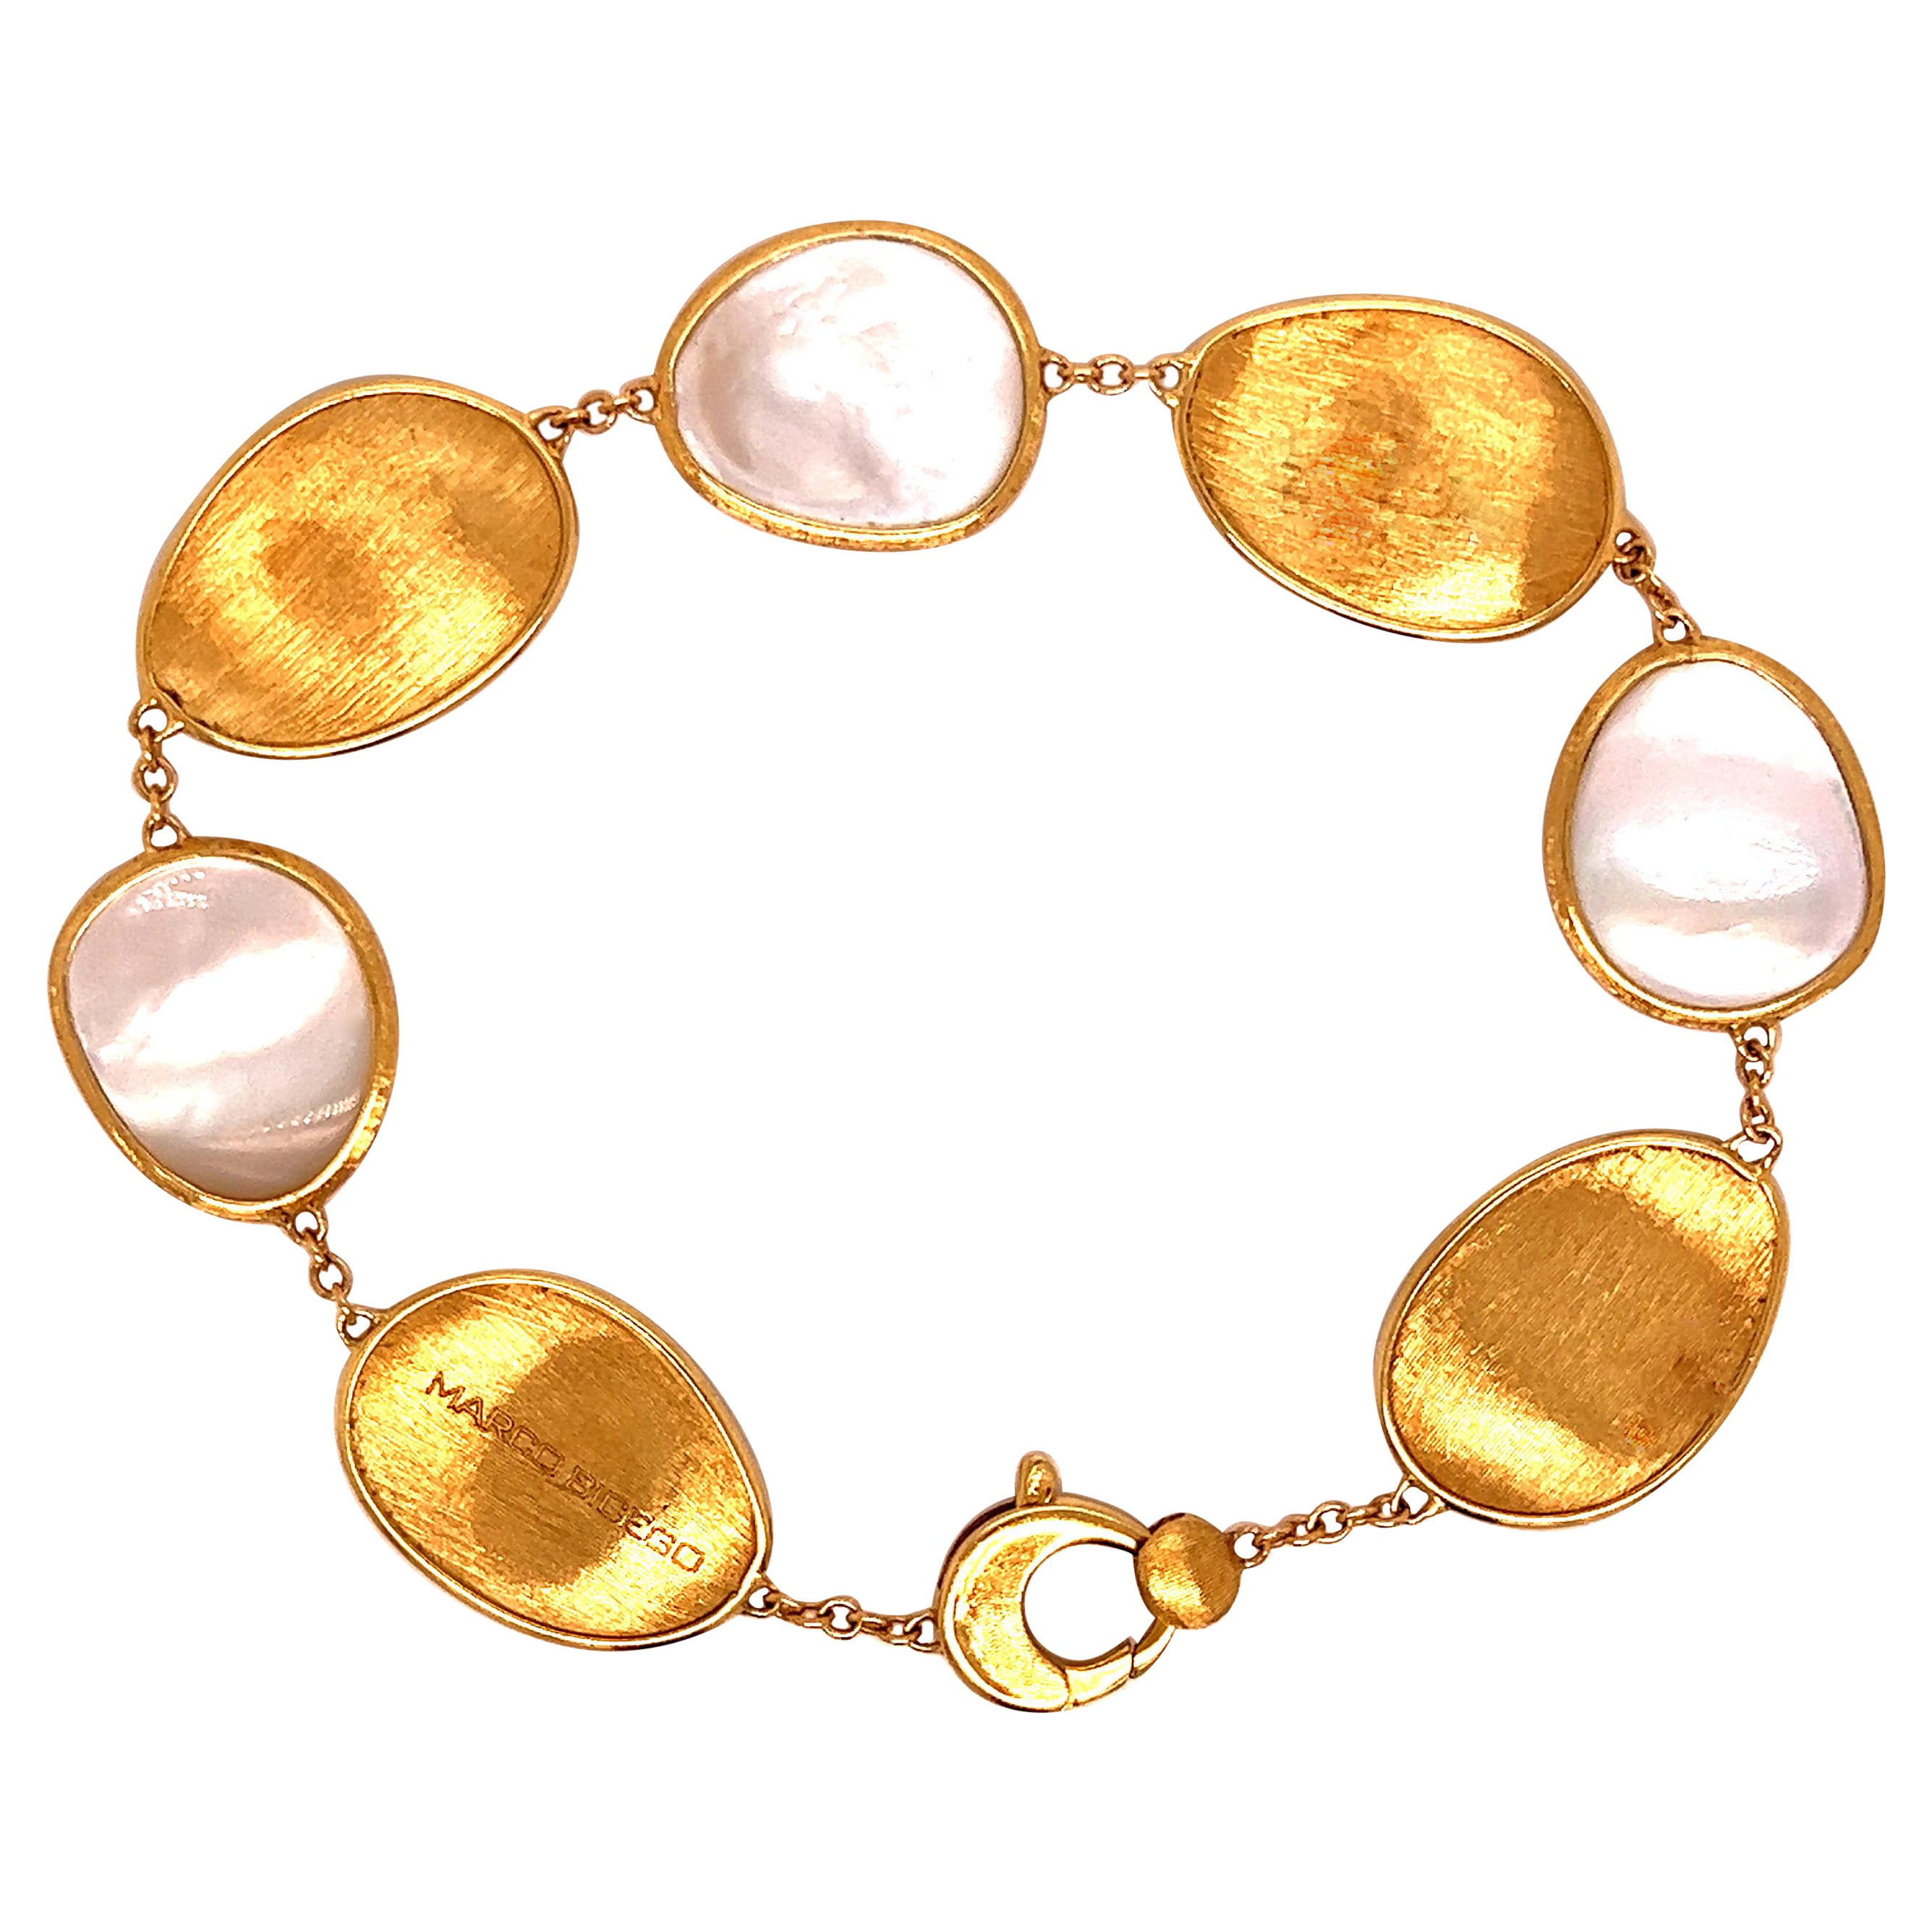 MarCo Bicego Lunaria Collection 18k Yellow Gold White Mother of Pearl Bracelet